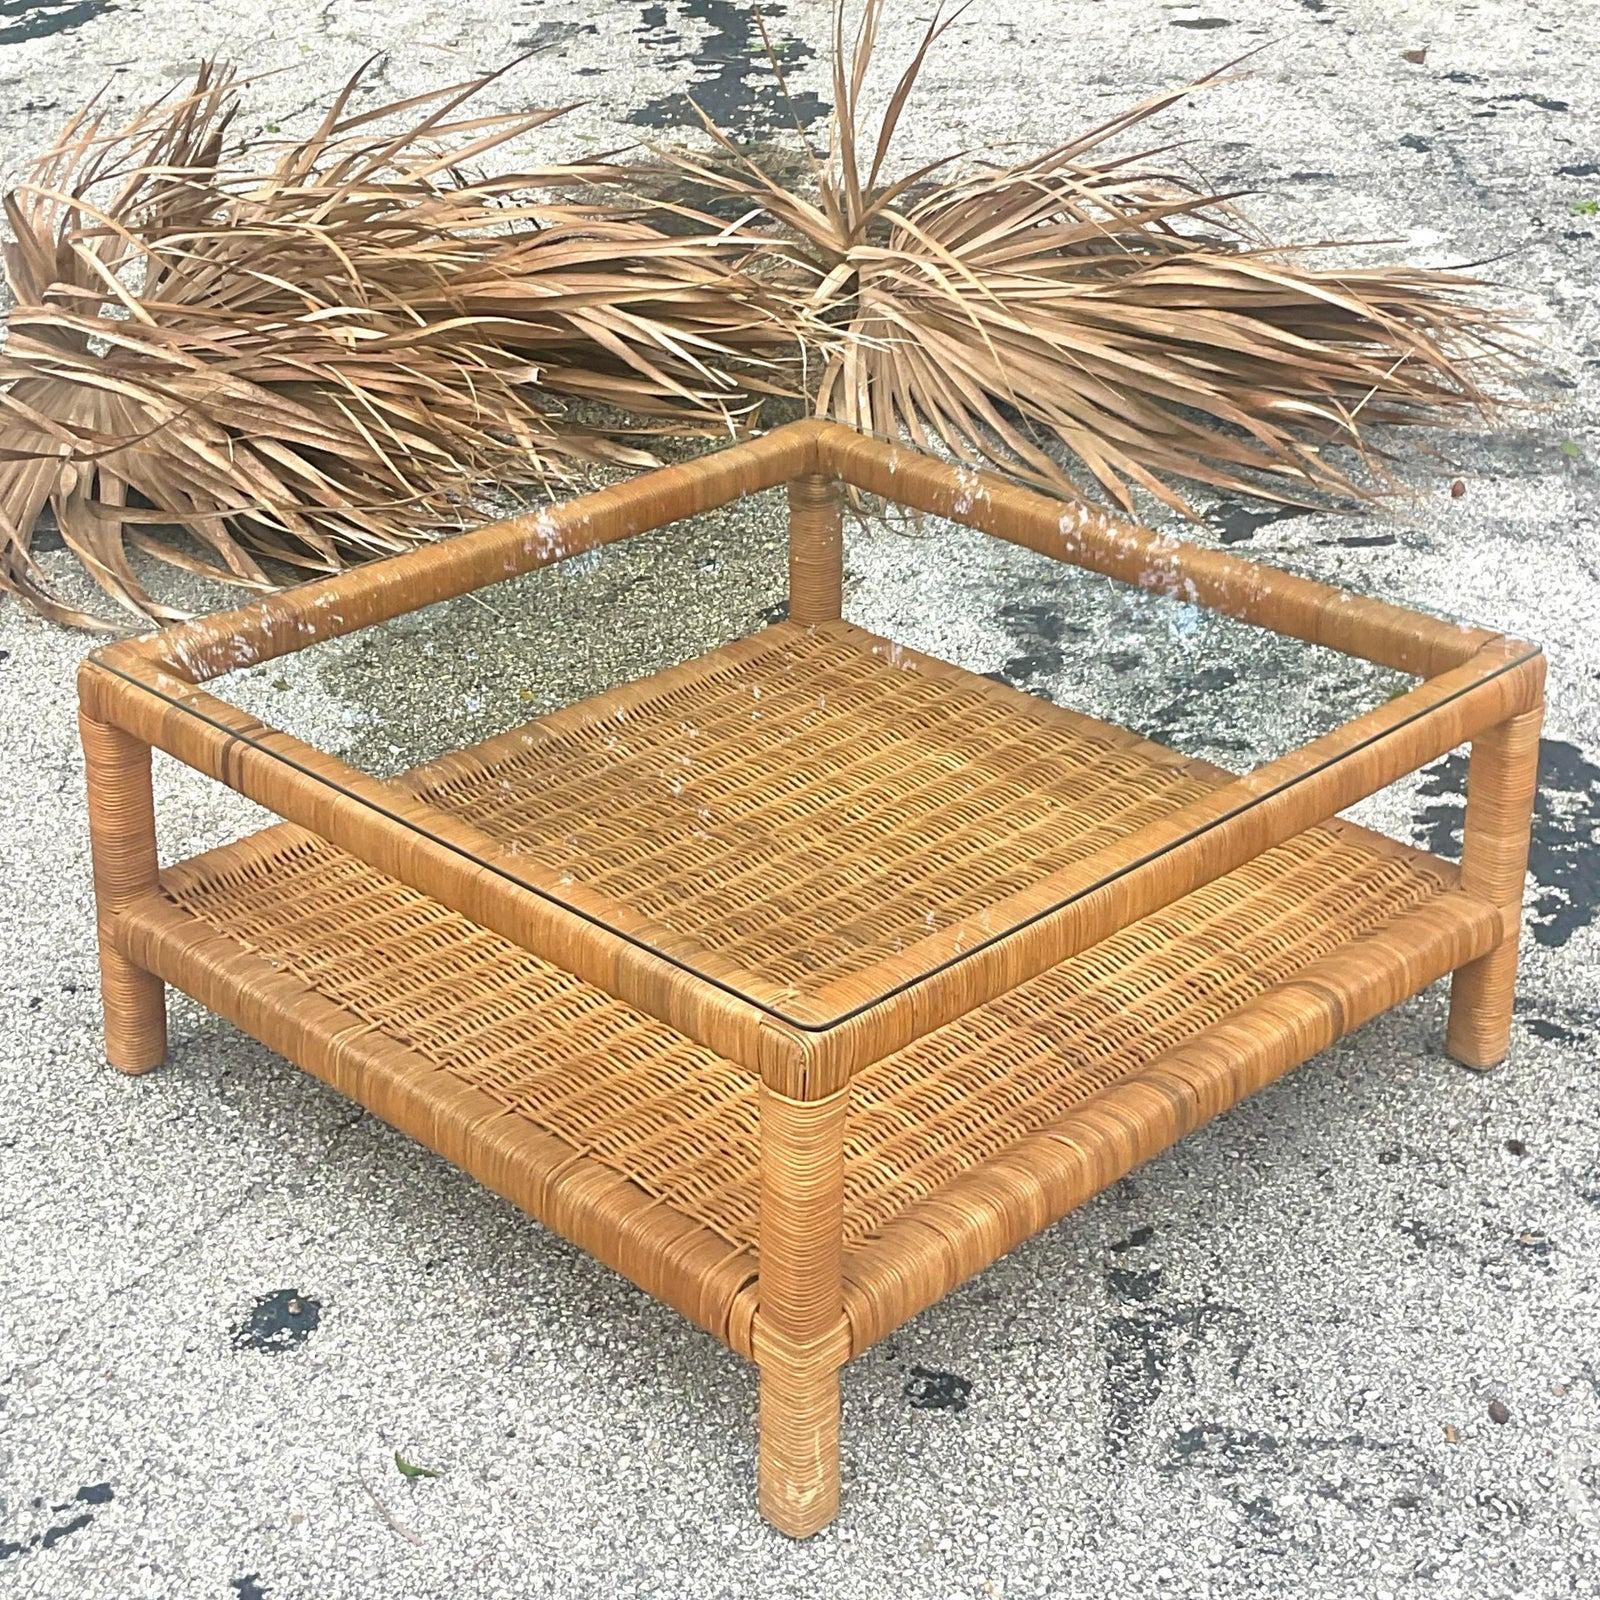 A fabulous vintage Coastal coffee table. A chic woven rattan frame with inset glass top. Simple and stylish. A lower shelf for displaying your favorite collections. Acquired from a Palm Beach estate.